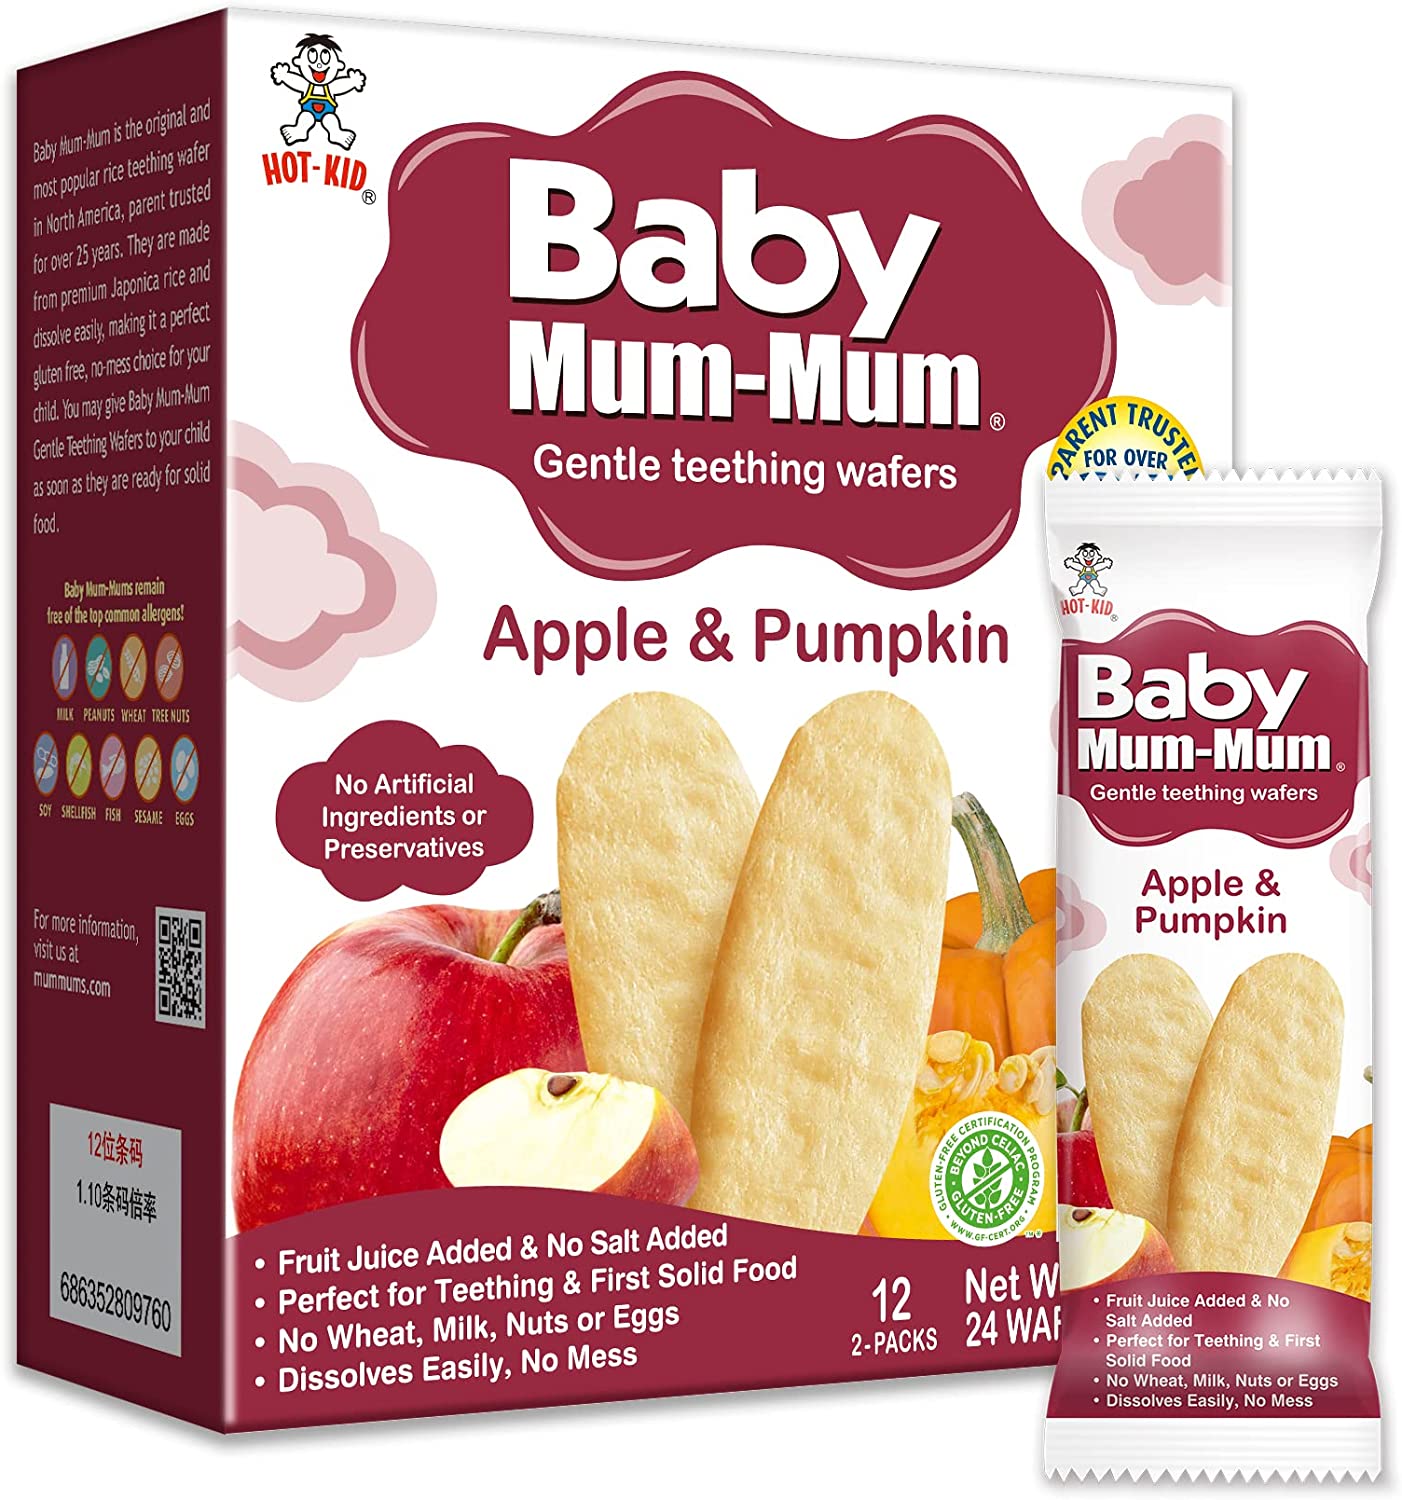 Baby Mum-Mum Rice Rusks, Apple & Pumpkin, 24 Pieces (Pack of 6) Gluten Free, Allergen Free, Non-GMO, Rice Teether Cookie for Teething Infants